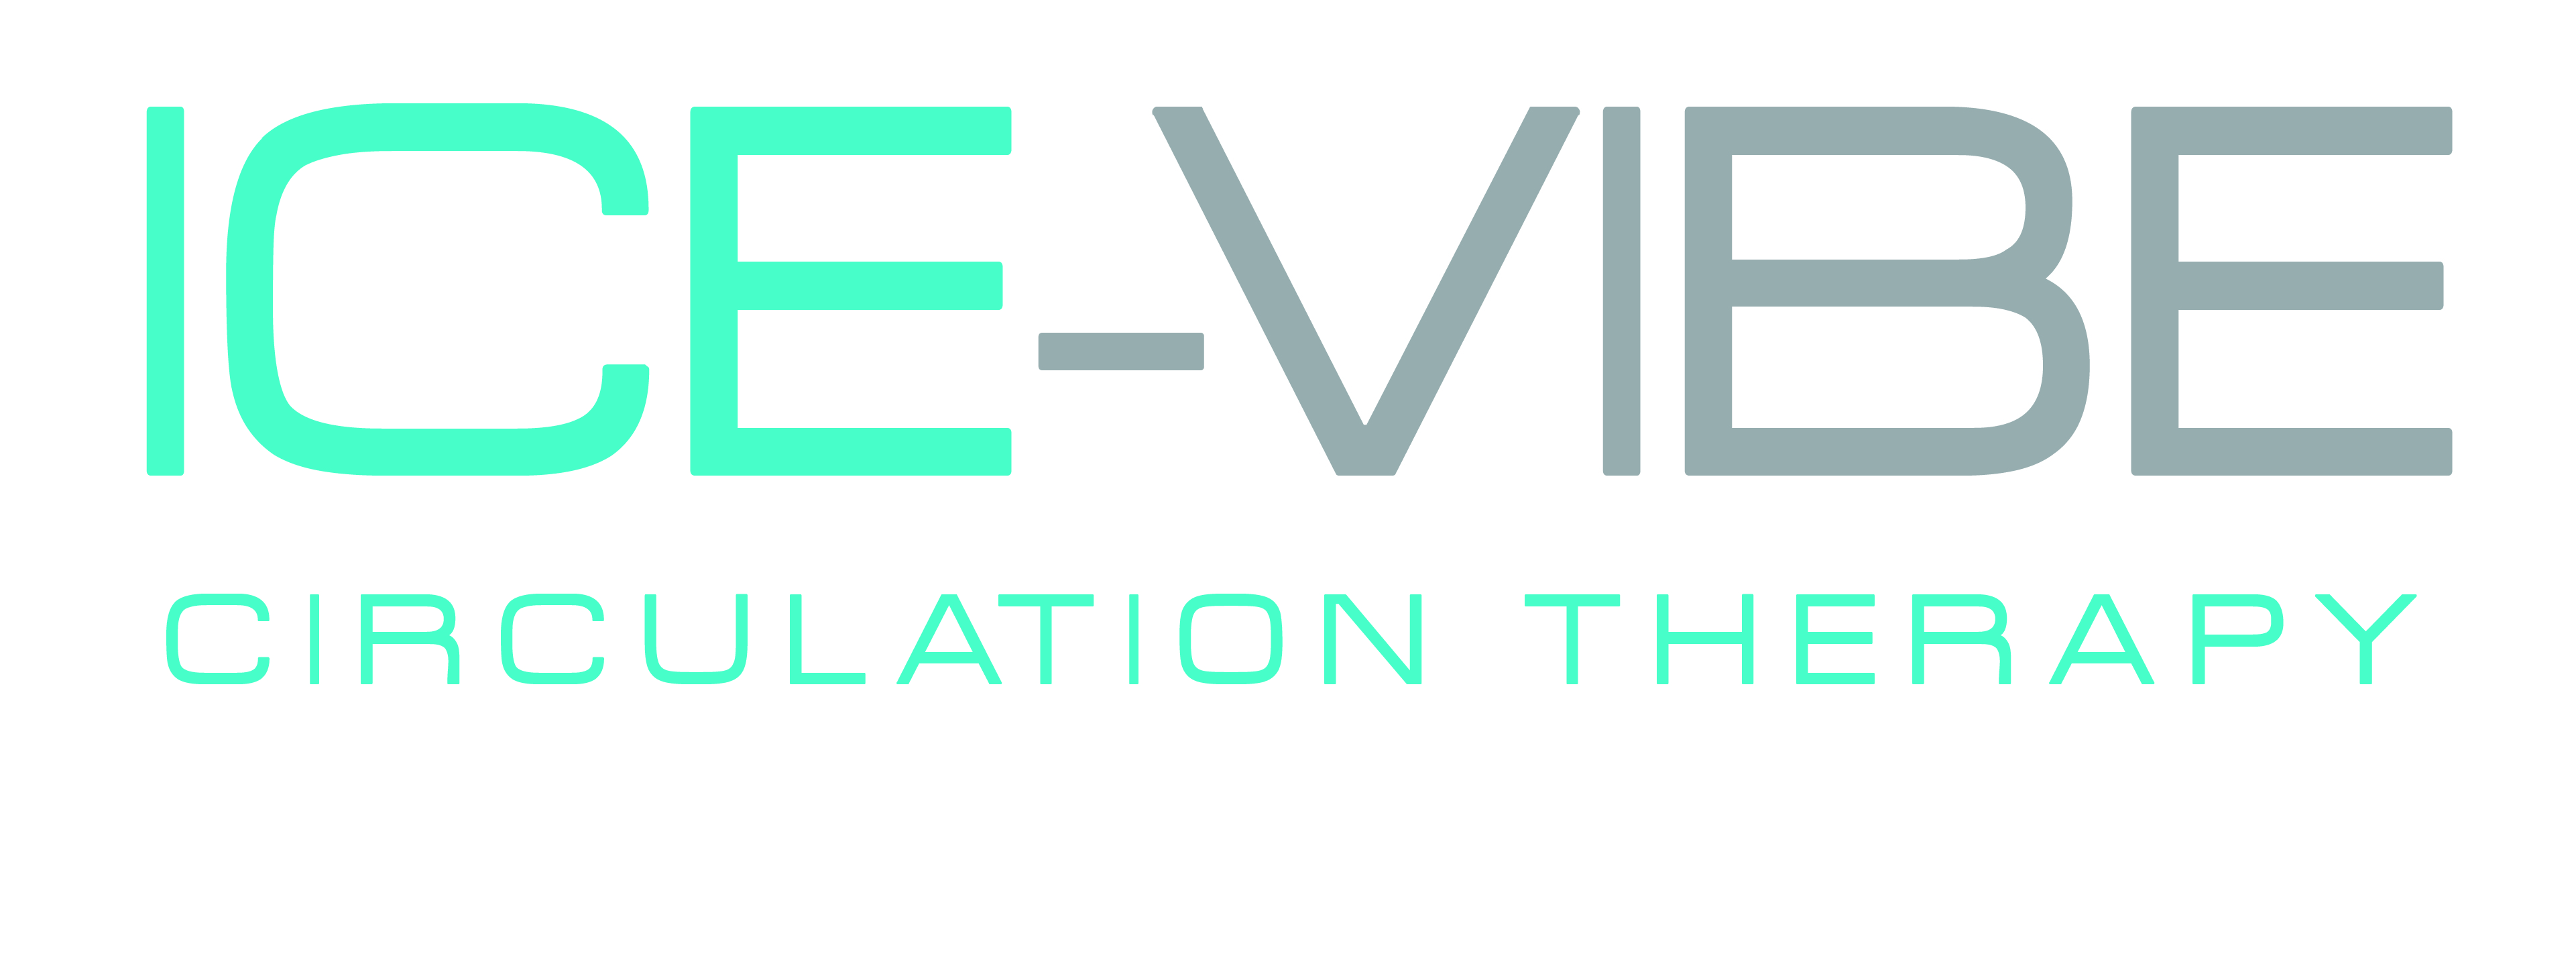 Ice-Vibe: Prevention, Recovery, Rehabilitation